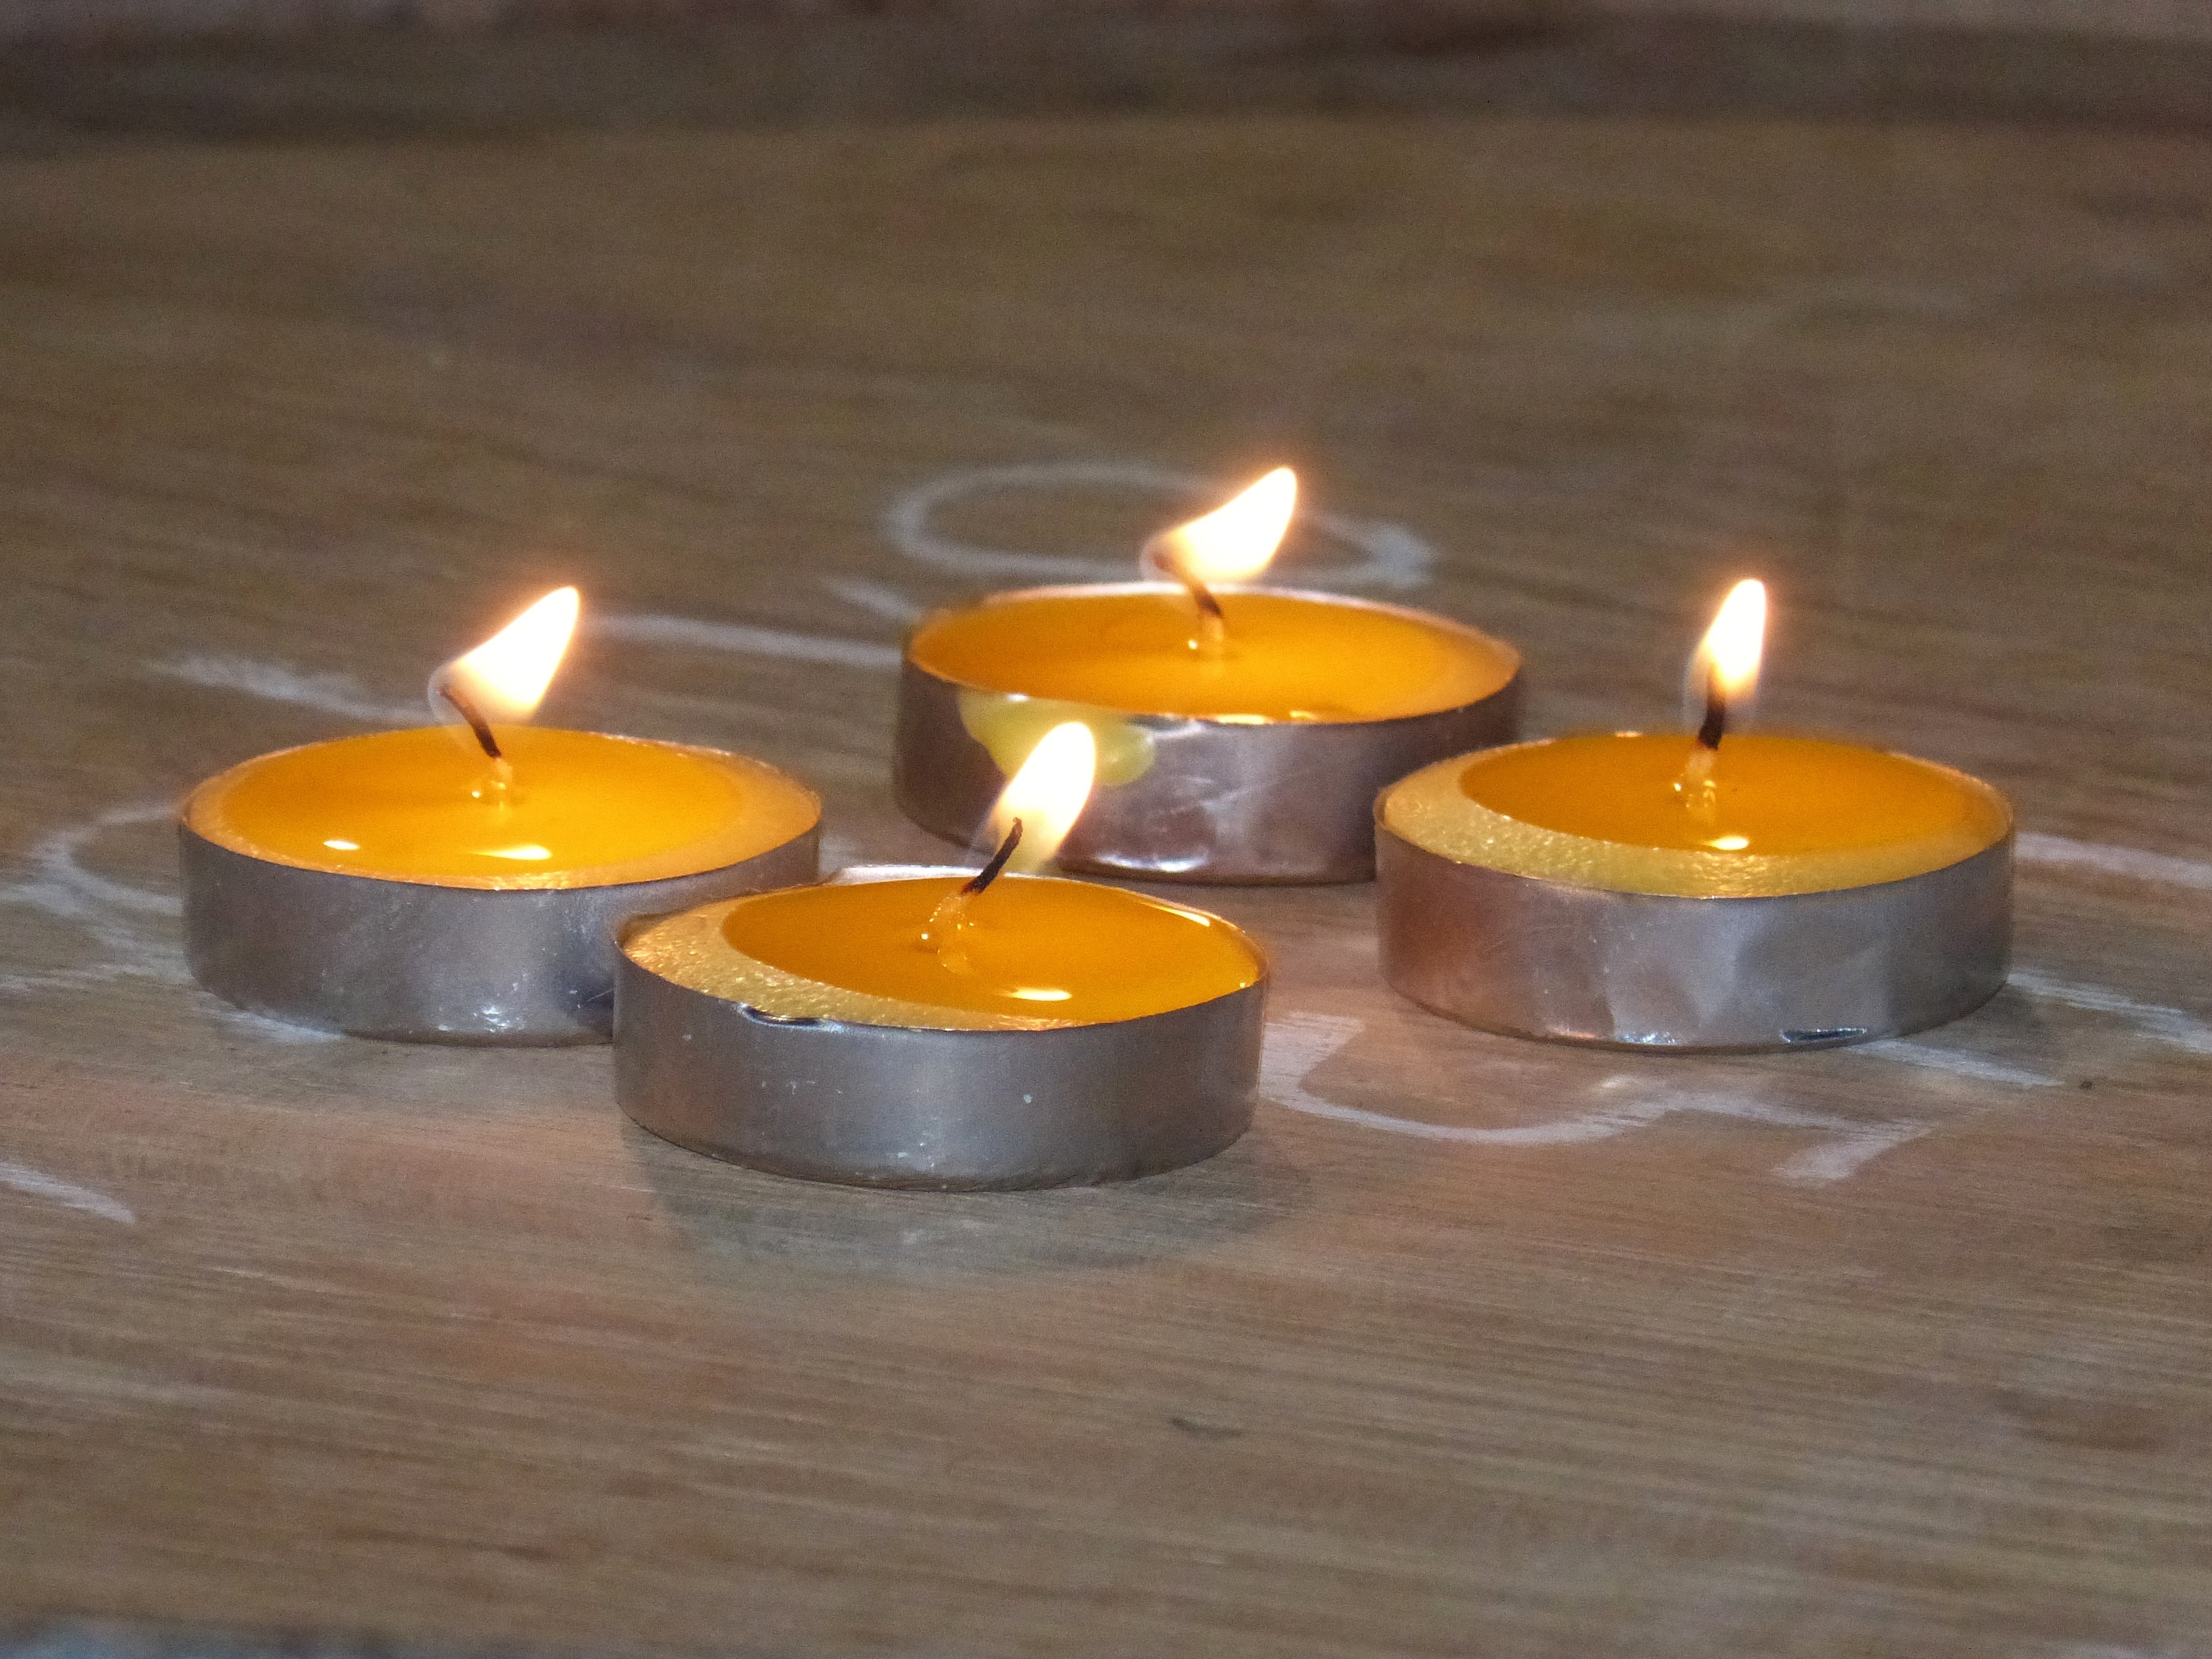 4 yellow tealight candles